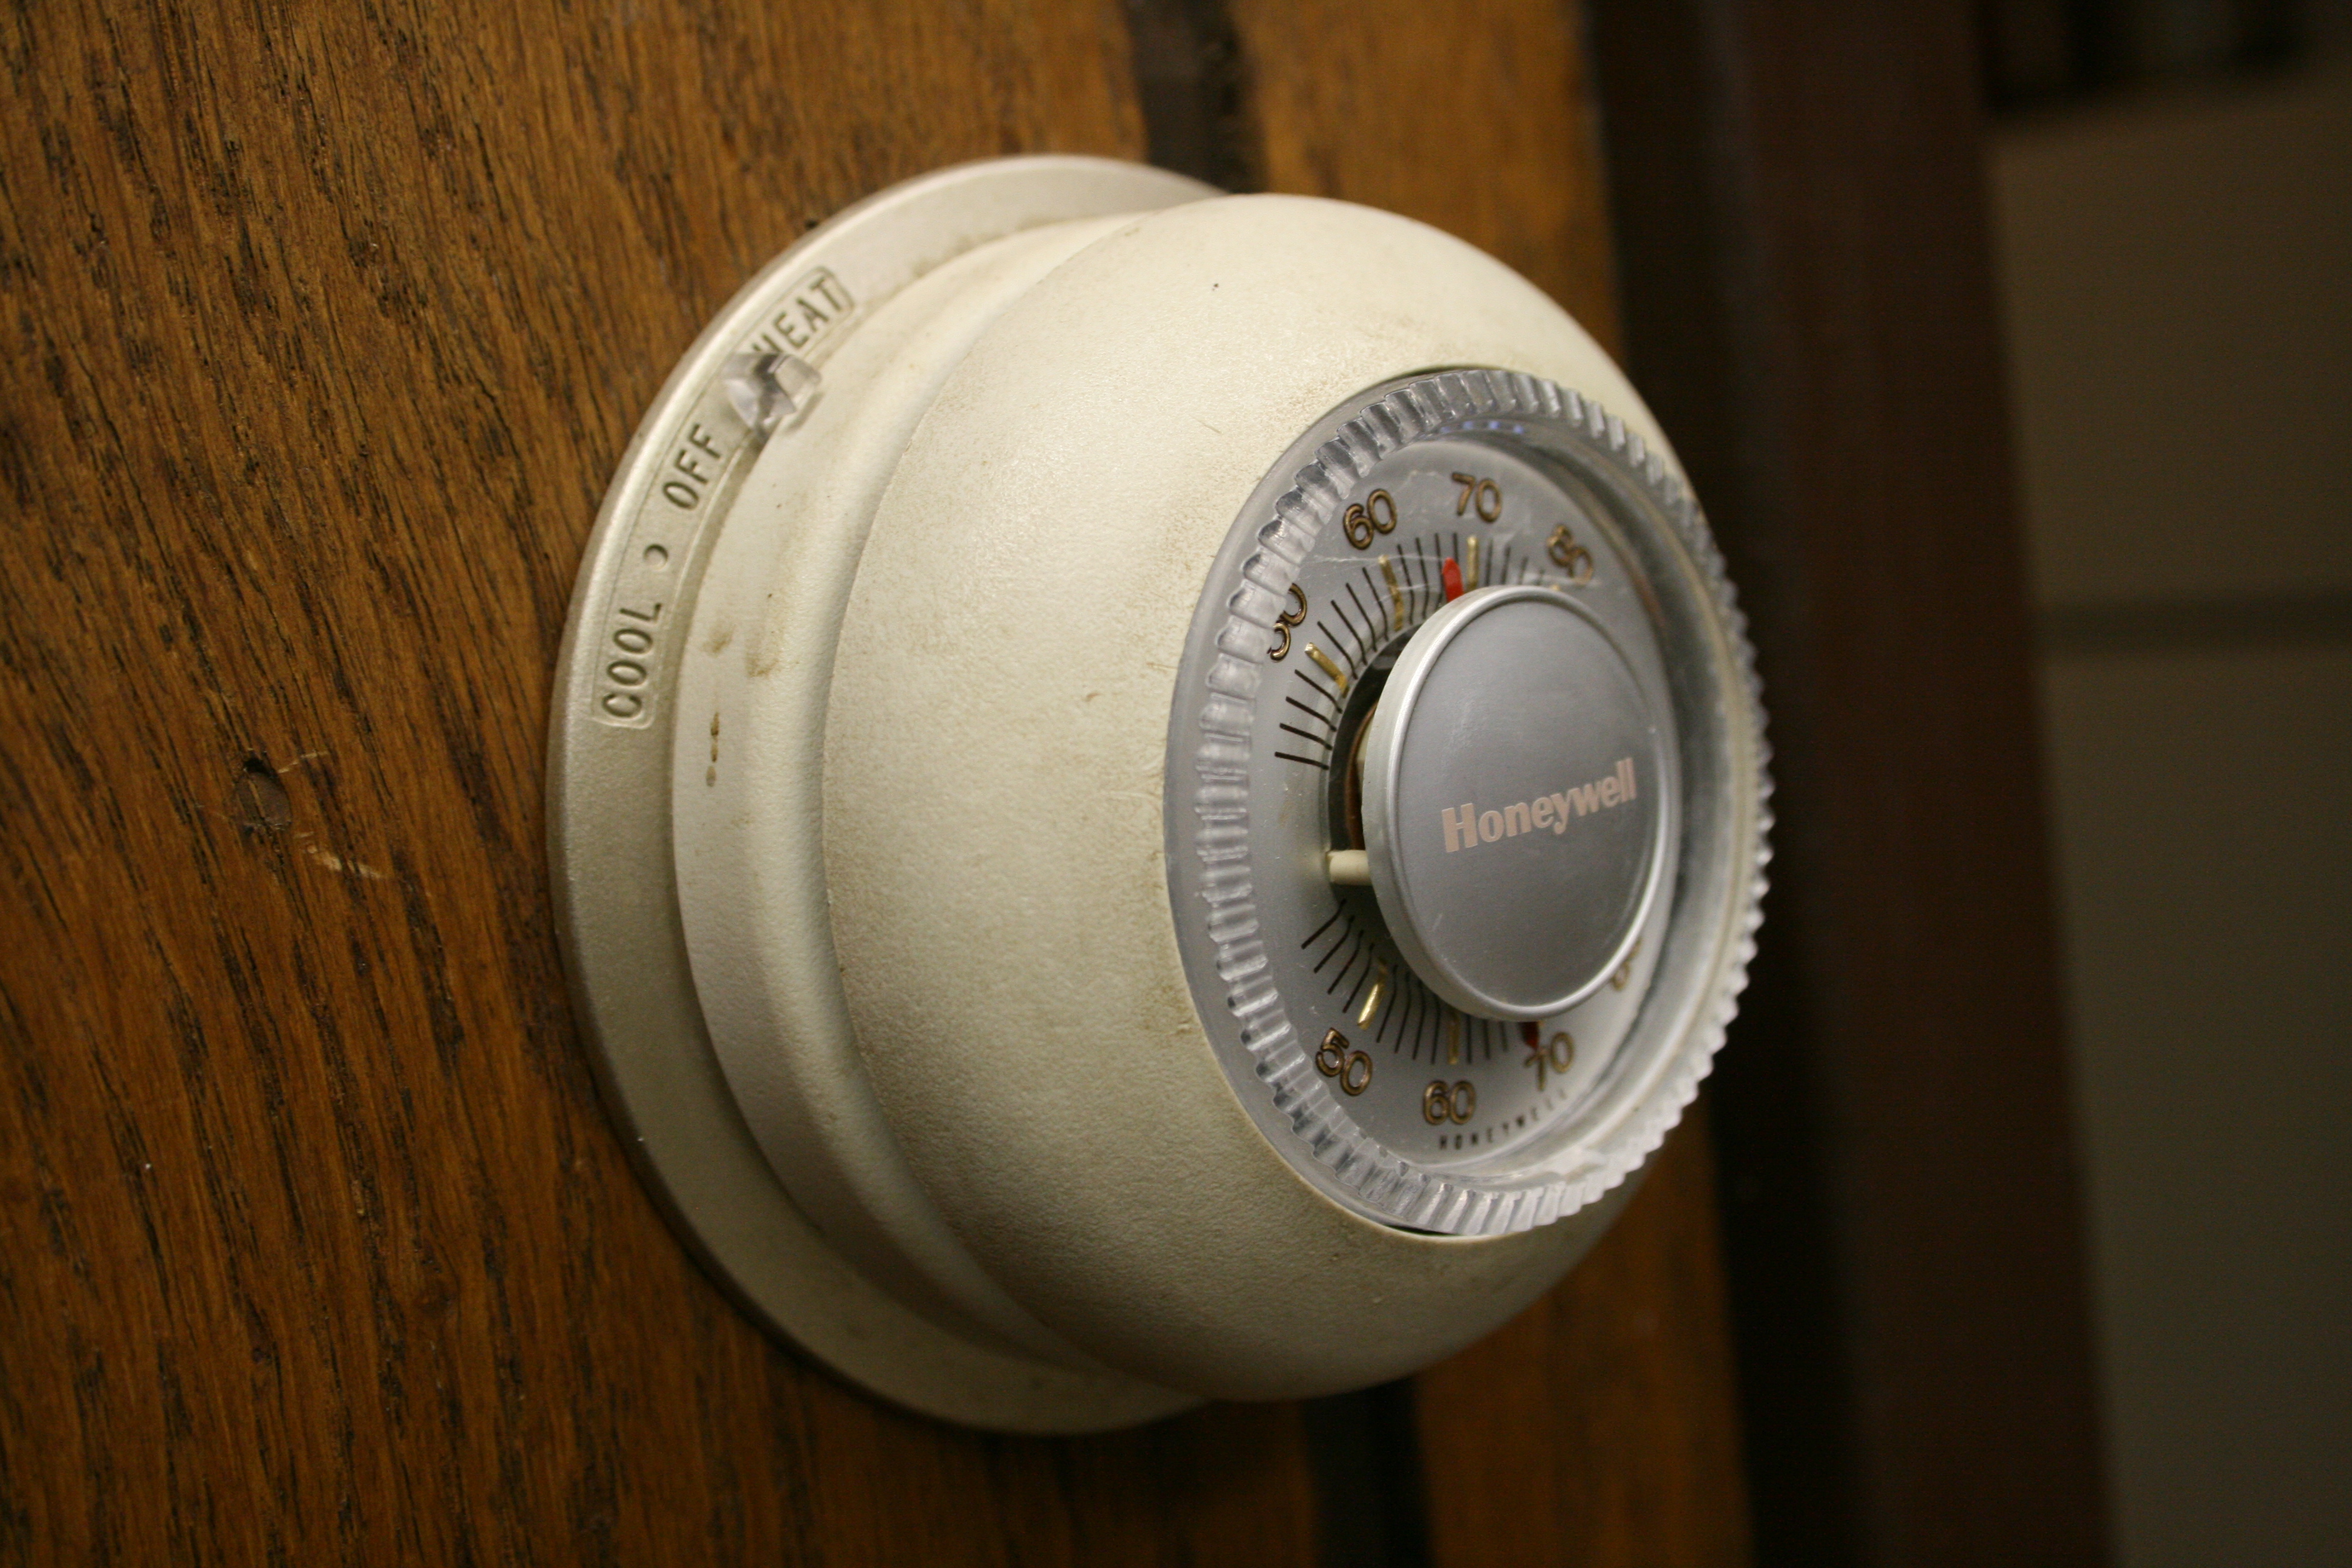 Honeywell thermostat photos older what model